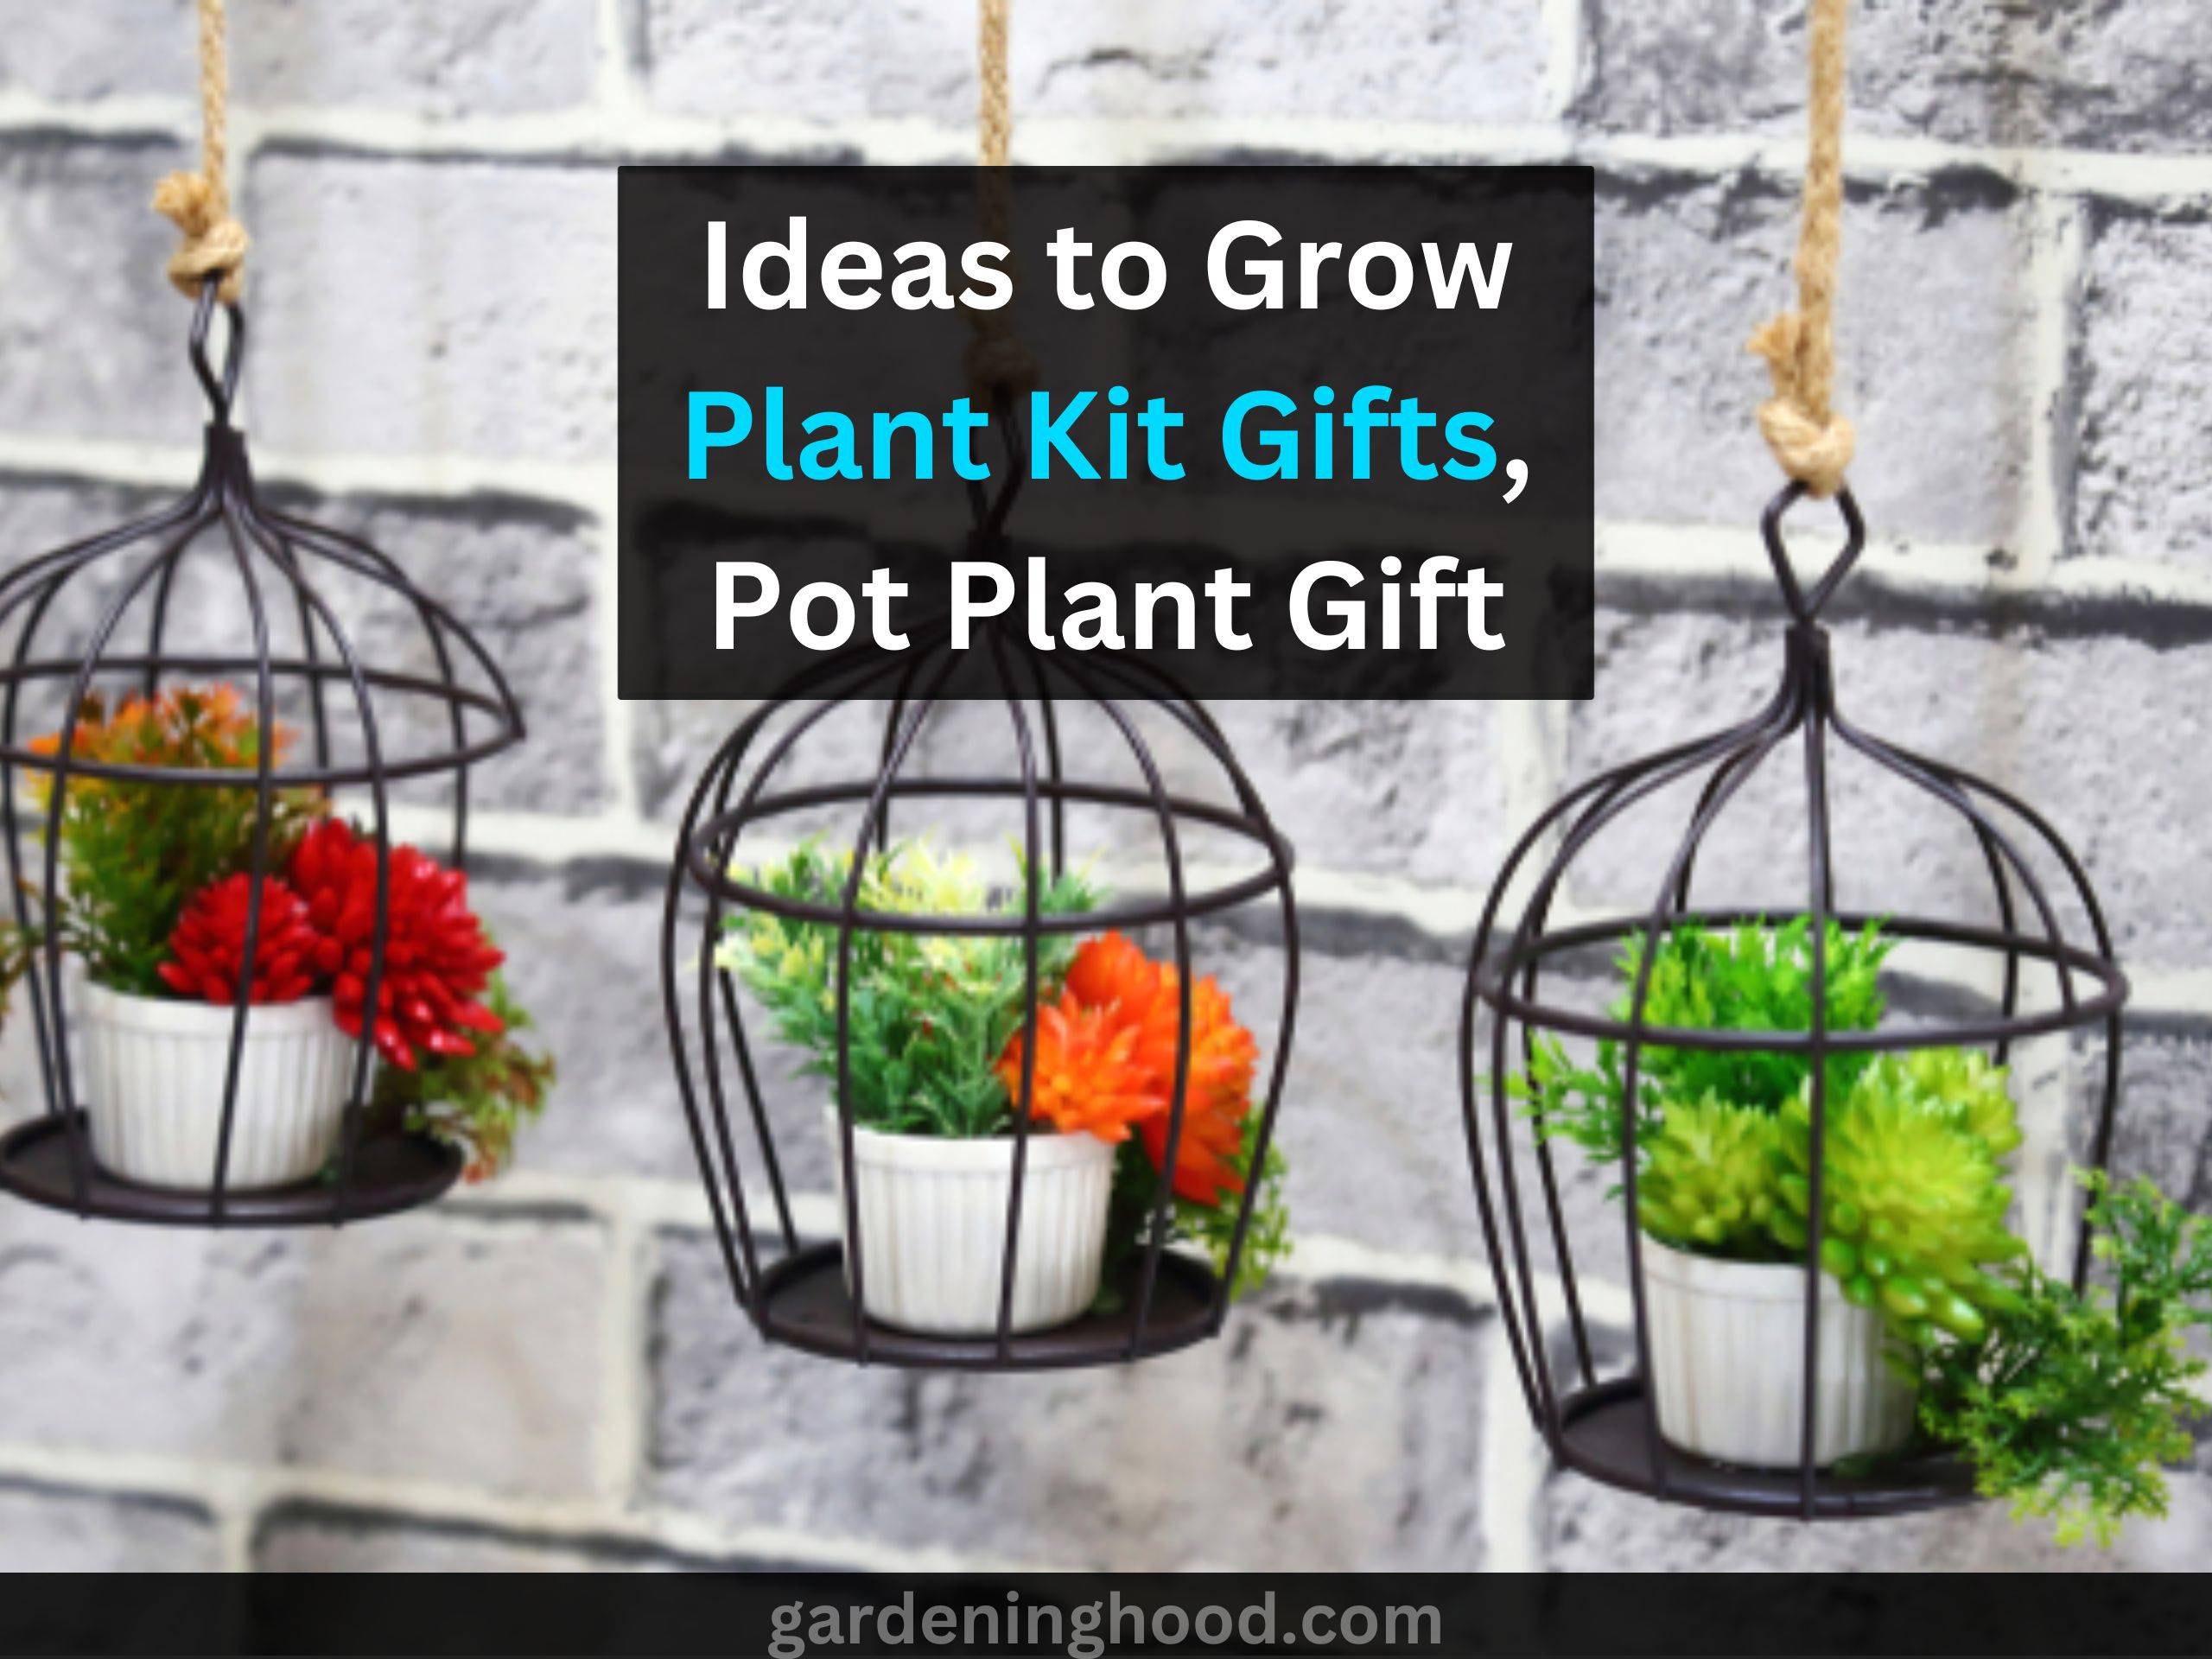 Ideas to Grow Plant Kit Gifts, Pot Plant Gift